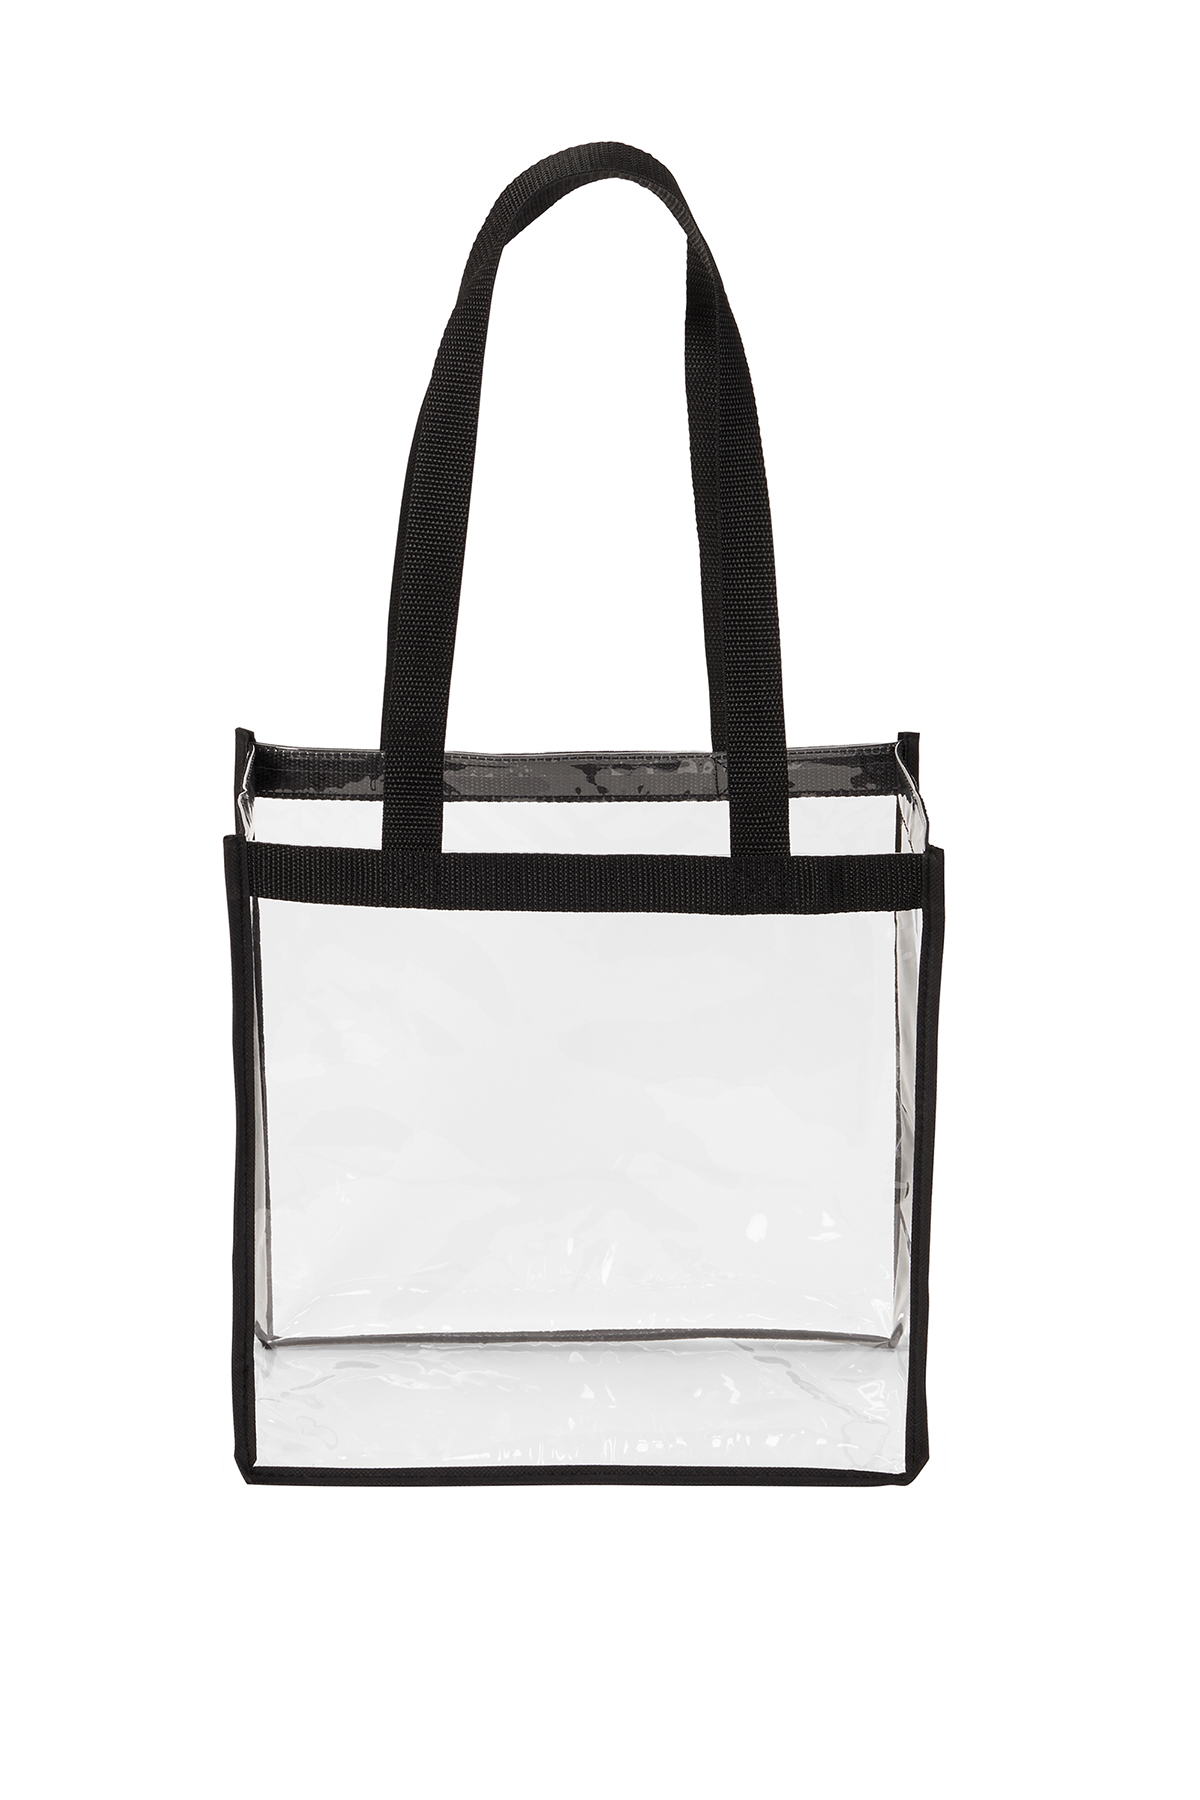 12 x 12 Clear Stadium Tote Bags with Colored Handles